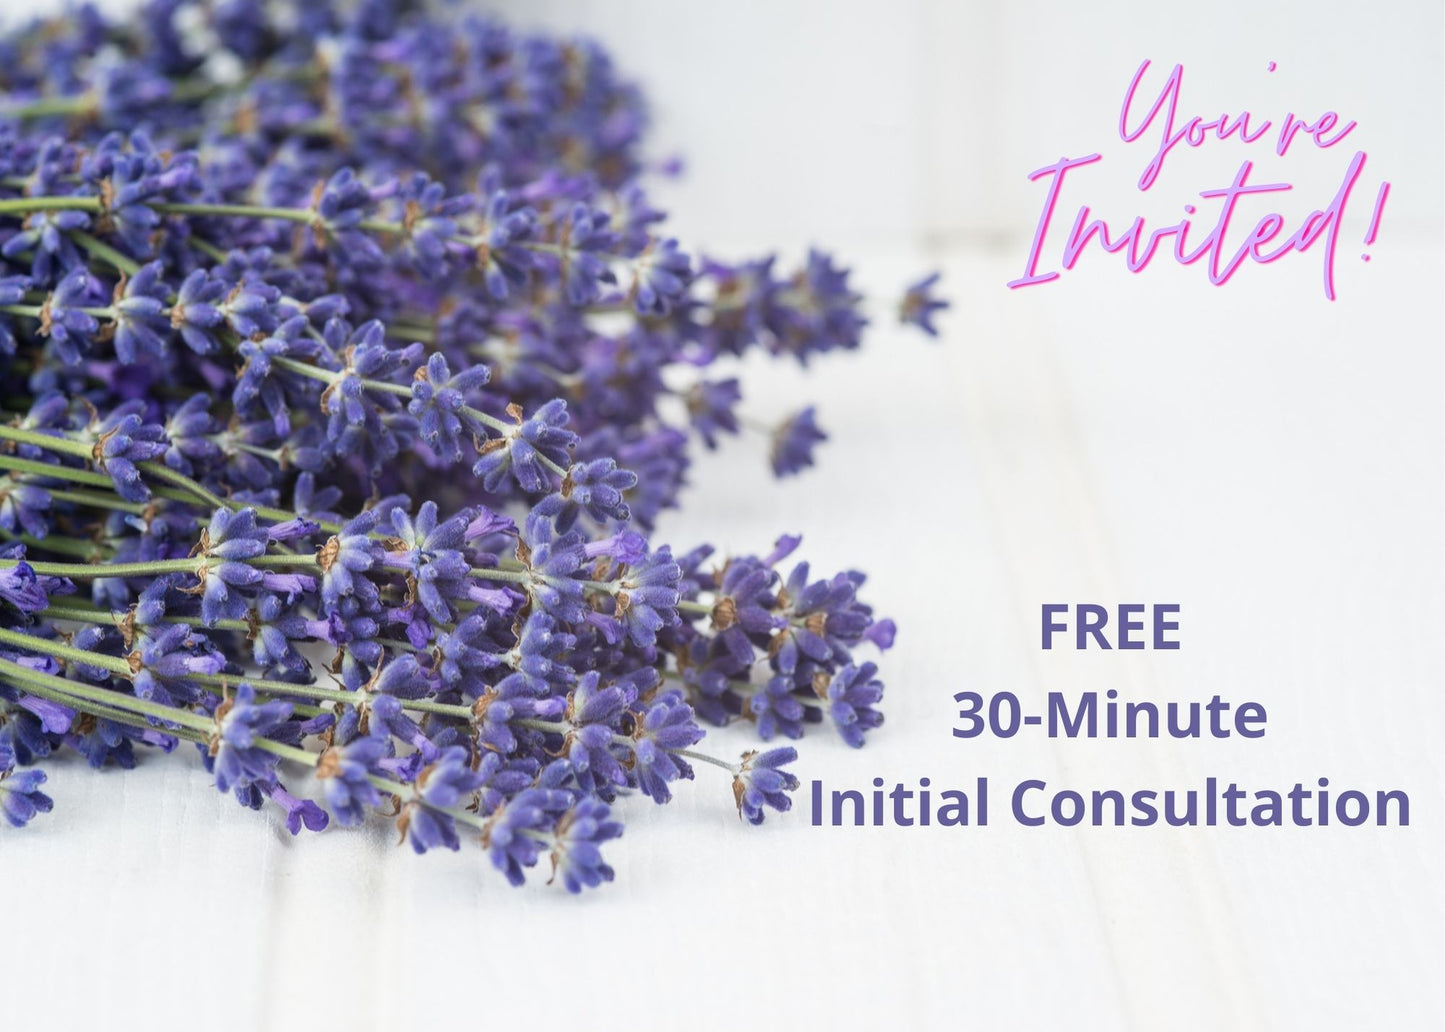 Complimentary 30-Minute Initial Consultation